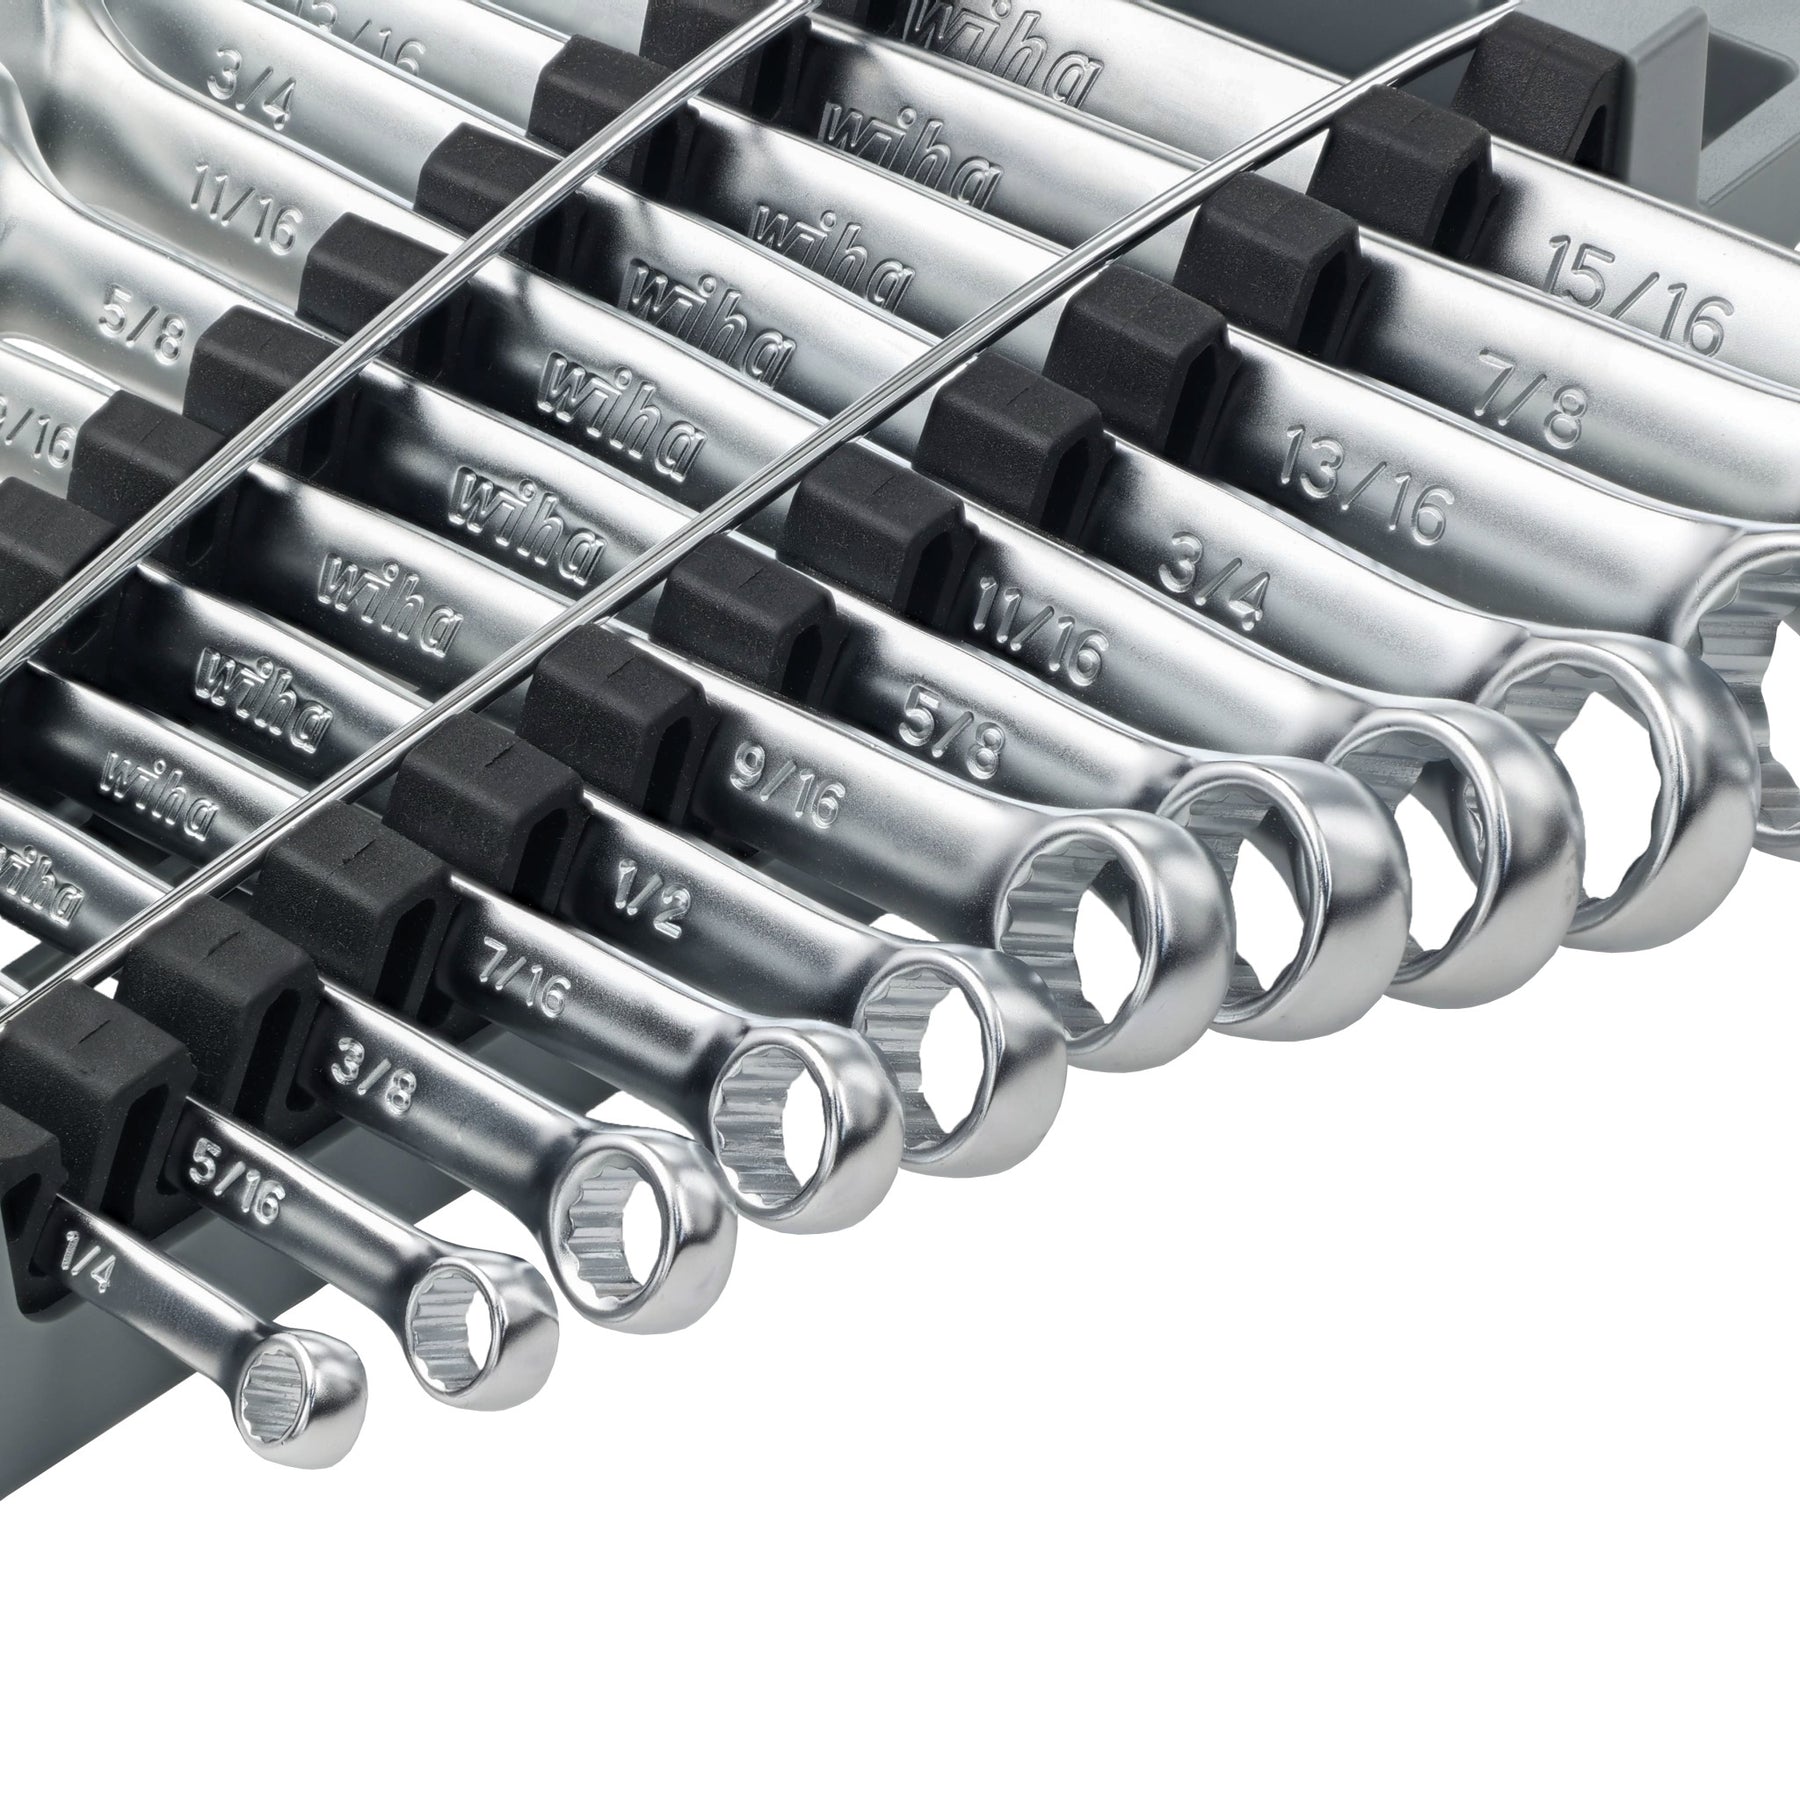 24 Piece Combination Wrench Set - Metric and SAE